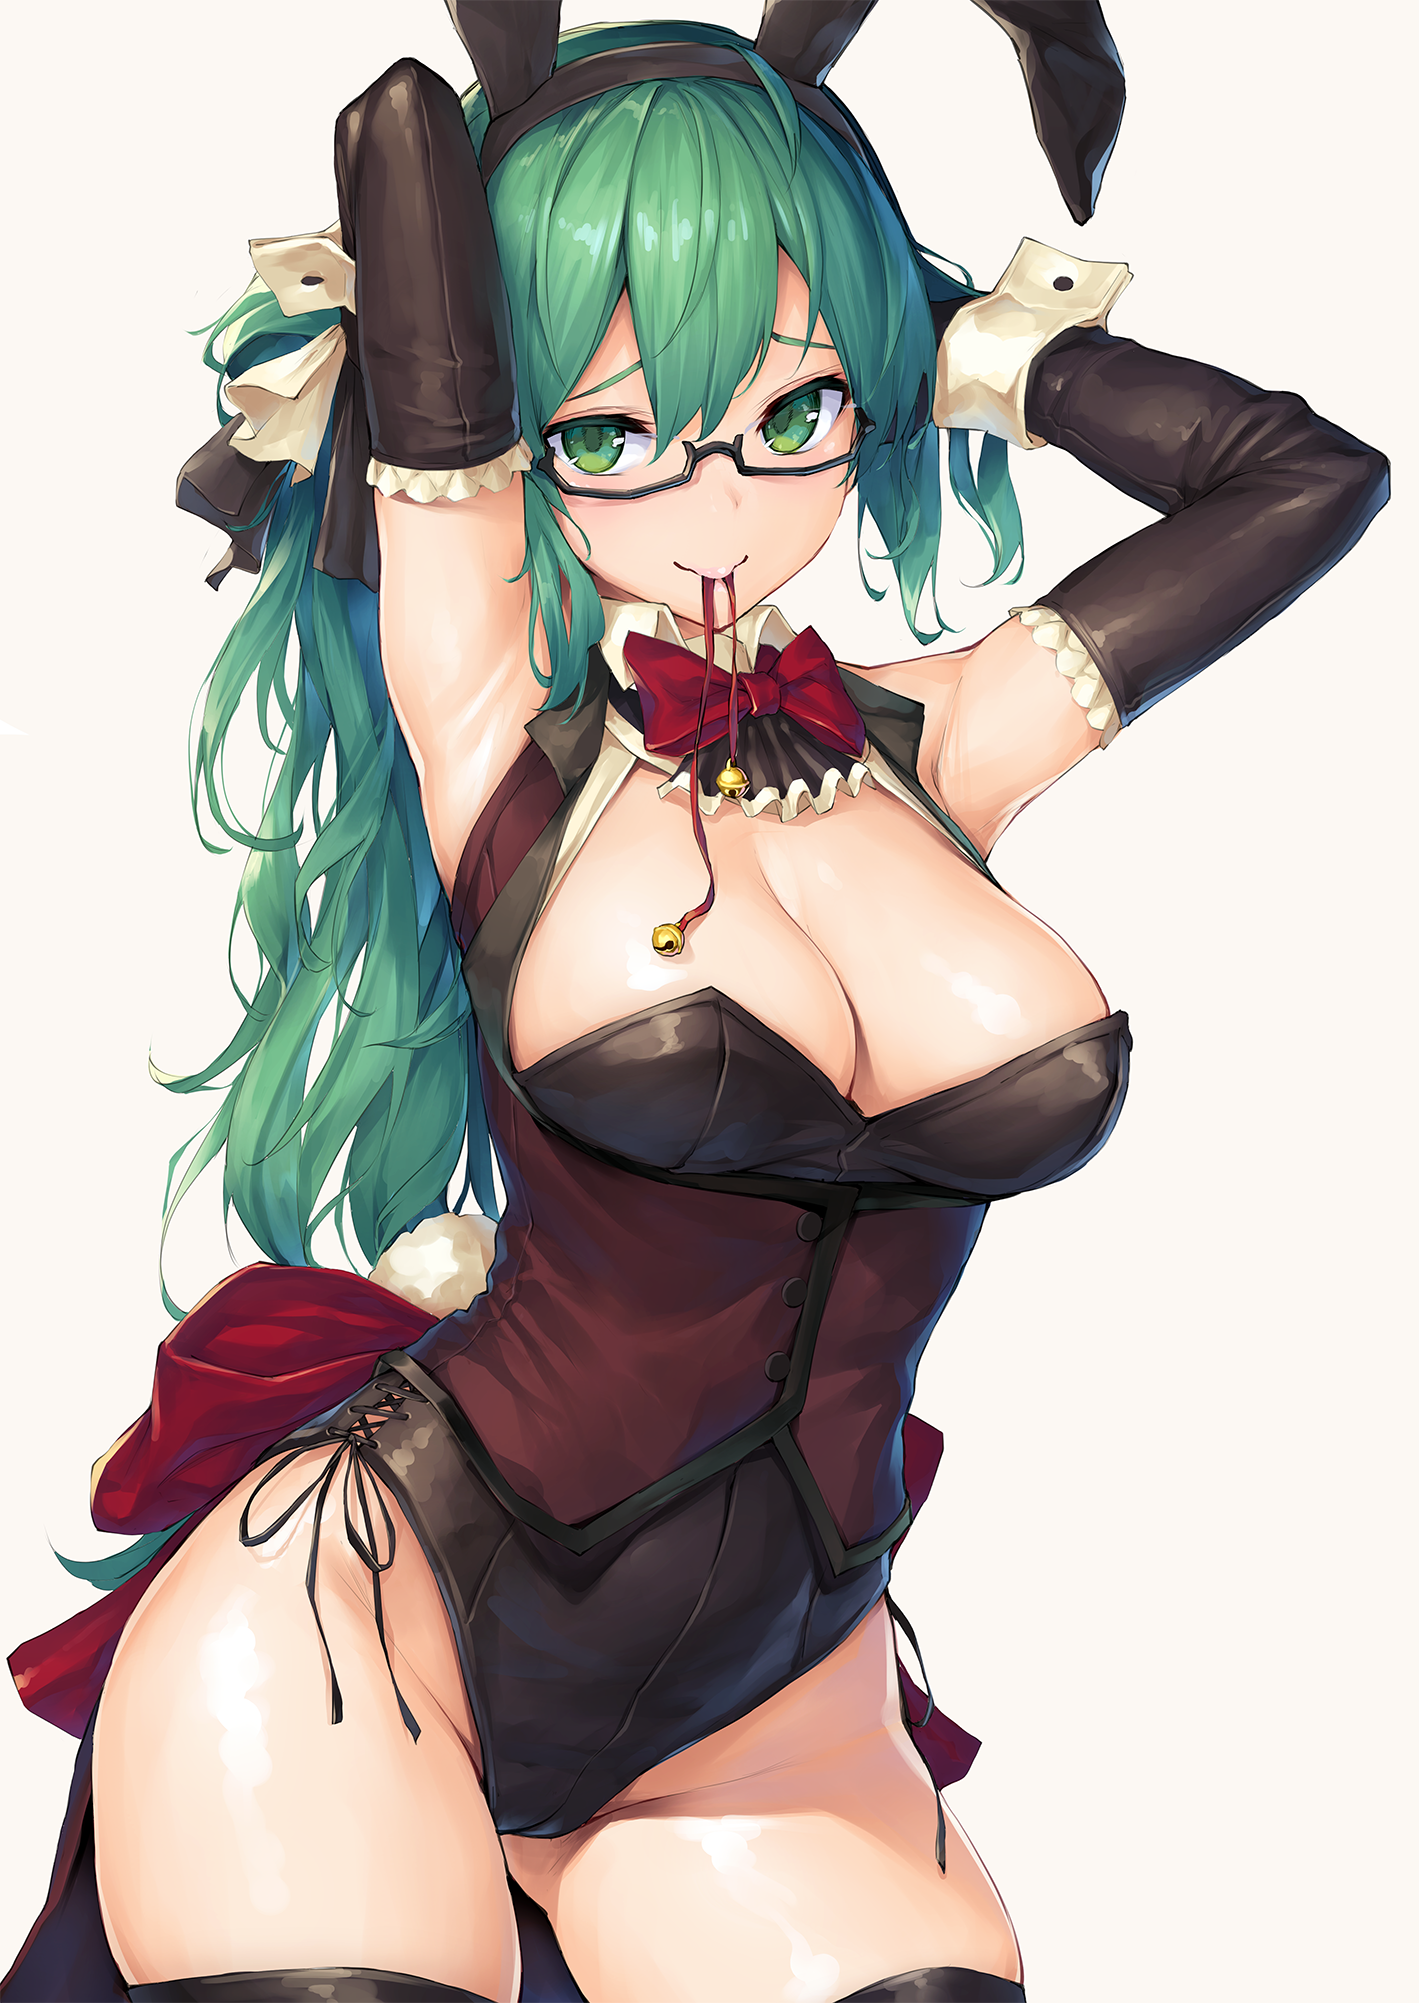 Anime 1419x2003 anime anime girls digital art artwork 2D portrait display Sy4may0 green hair green eyes glasses smiling bunny suit cleavage